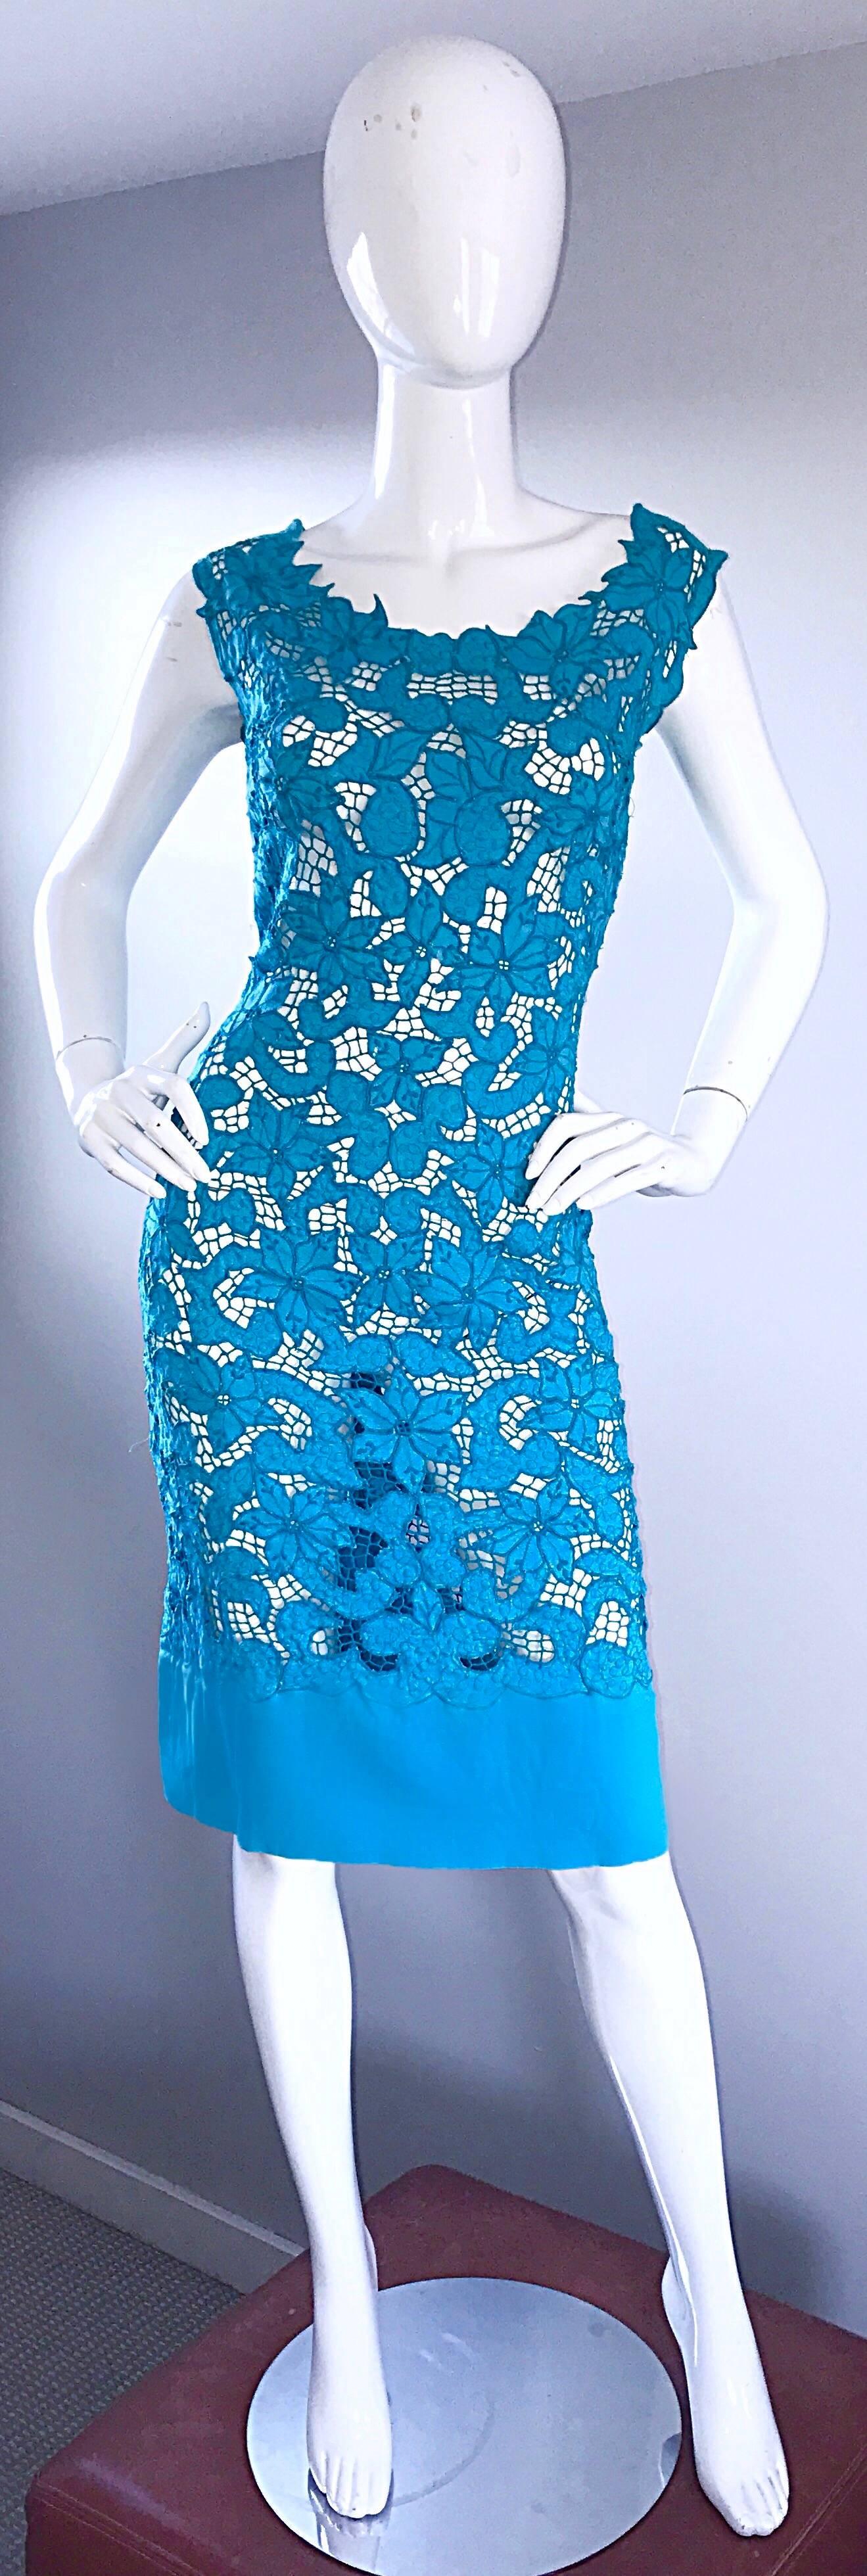 Incredible vintage 1950s Demi couture cut-out flower crochet wiggle dress! Mostly hand-sewn, with an amazing amount of detail! Vibrant turquoise blue color. Sleevless cap sleeves, with a solid hem. Full metal zipper up the back with hook-and-eye